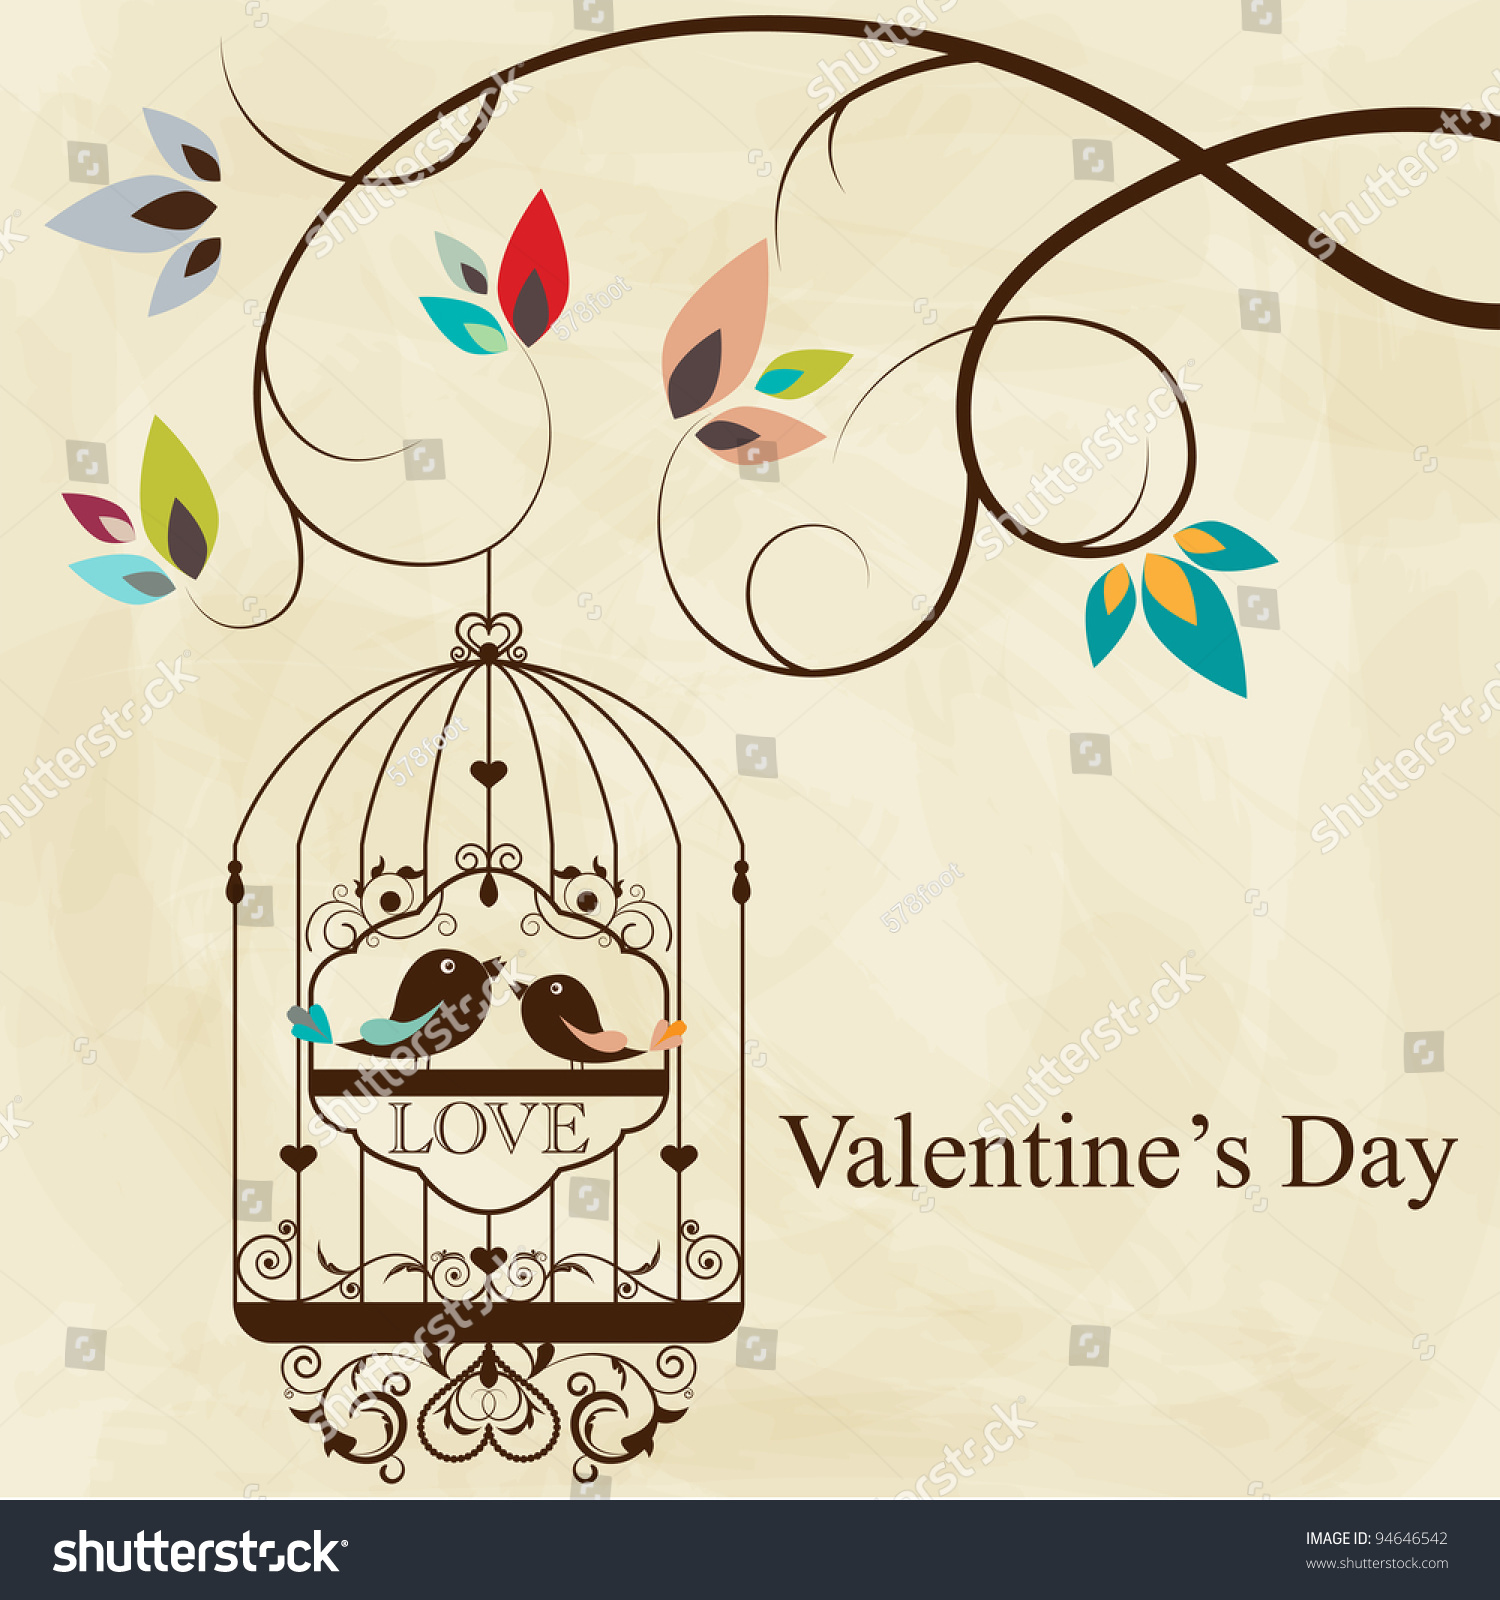 St. Valentine'S Day Greeting Card With Birds Stock Vector 94646542 : Shutterstock1500 x 1600